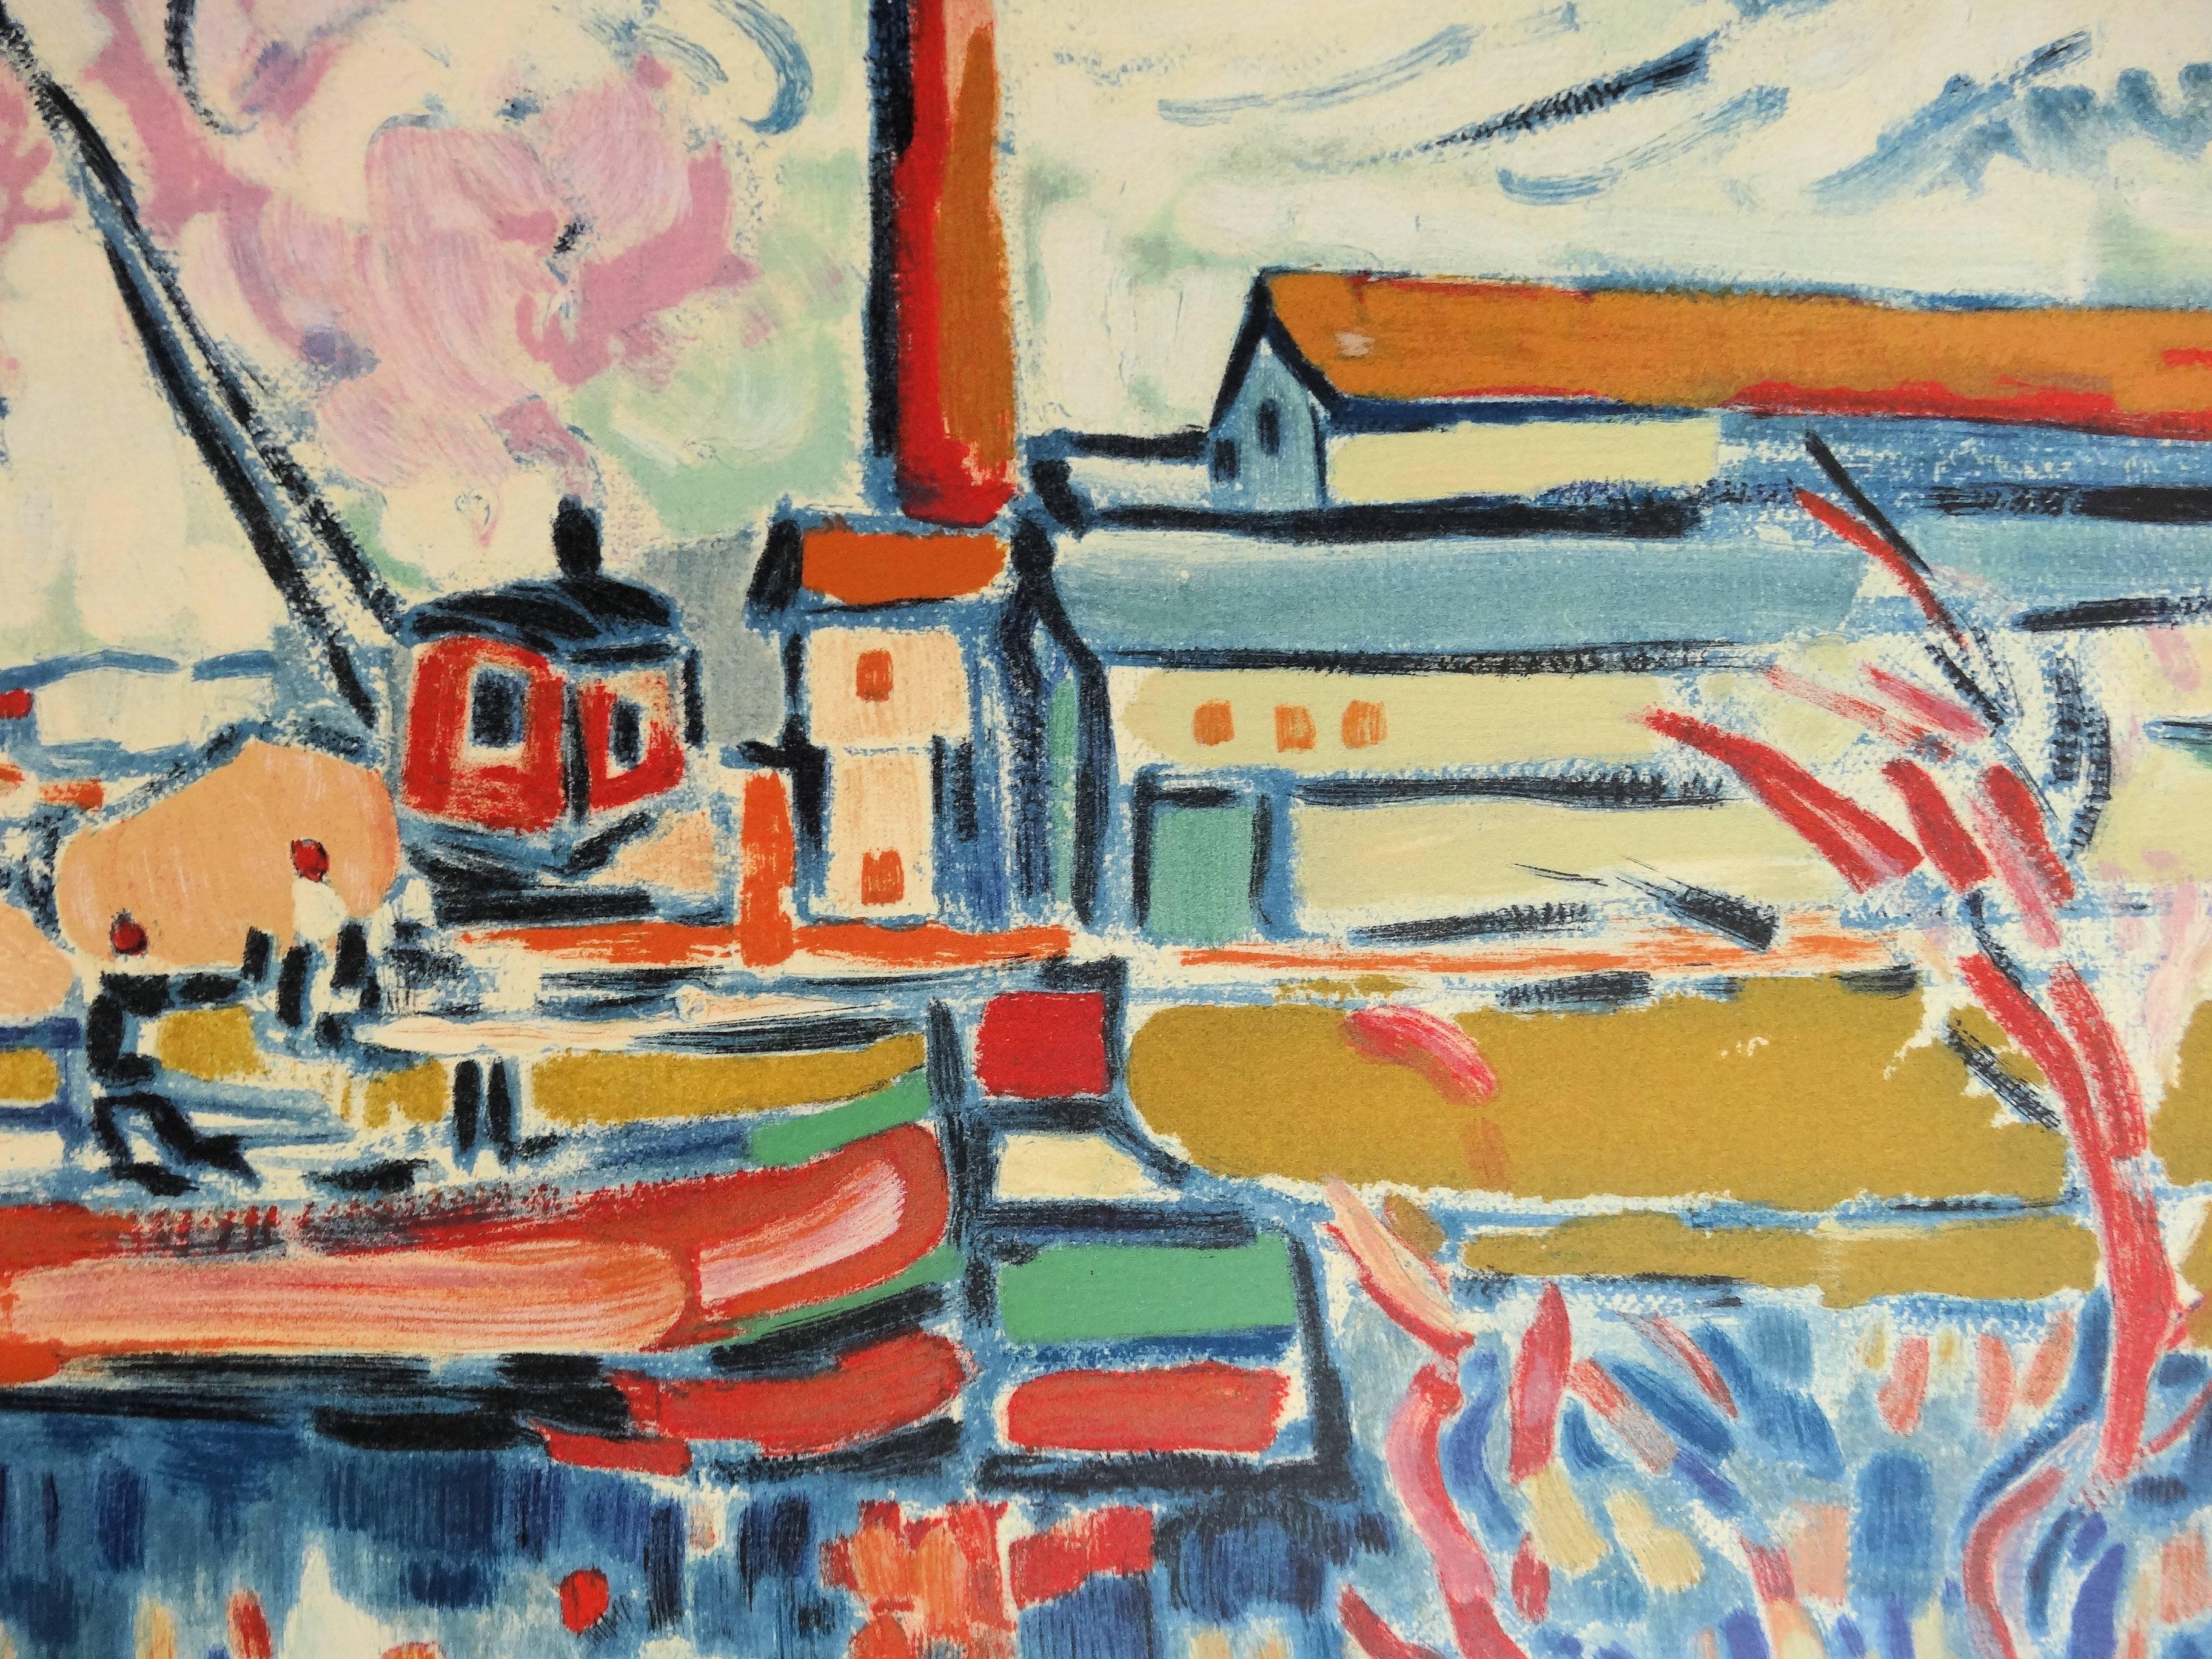 Maurice de VLAMINCK (after)
Seine River and Boat in Chatou

Color lithograph after a painting
Printed signature in the plate
On Arches Vellum 50 x 65 cm (c. 20 x 26 inch)

Excellent condition